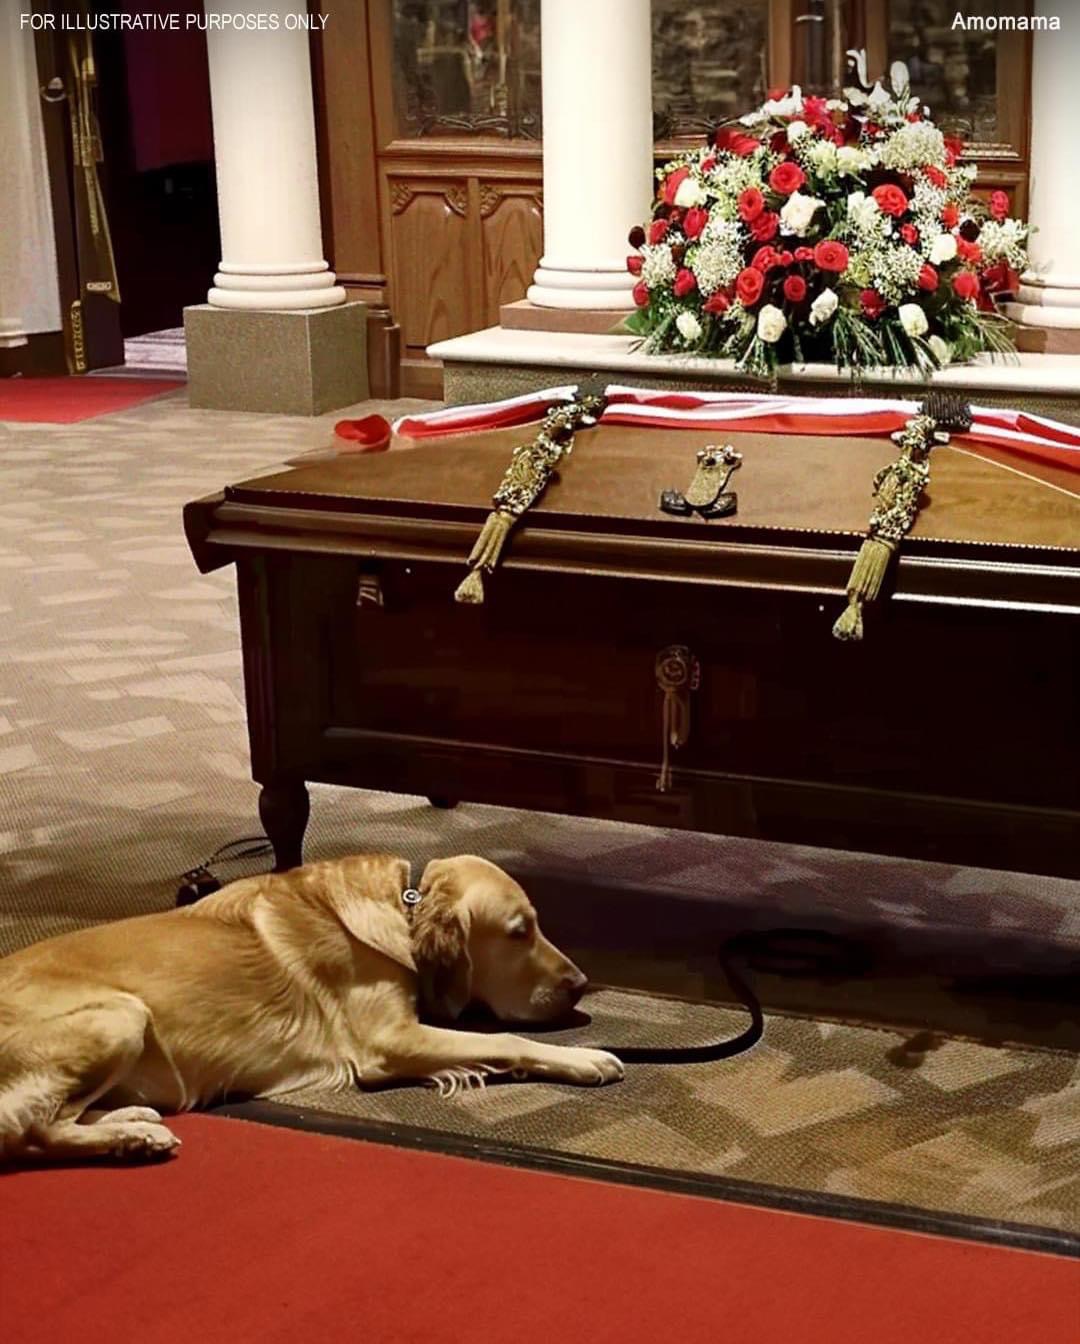 Dog Barks at Coffin during Funeral, Son Opens It and What He Finds Inside Shocks Everyone